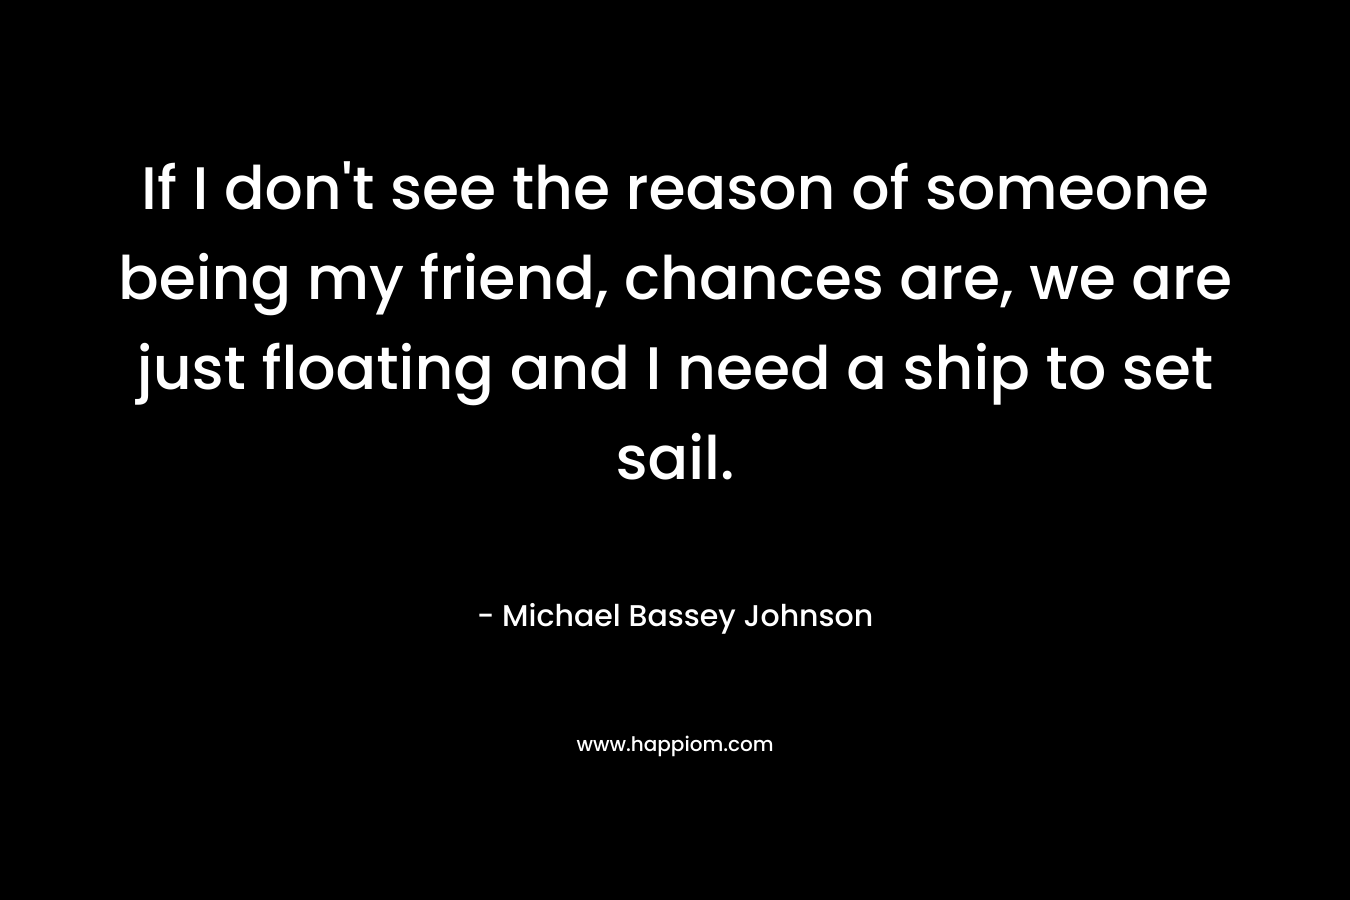 If I don't see the reason of someone being my friend, chances are, we are just floating and I need a ship to set sail.